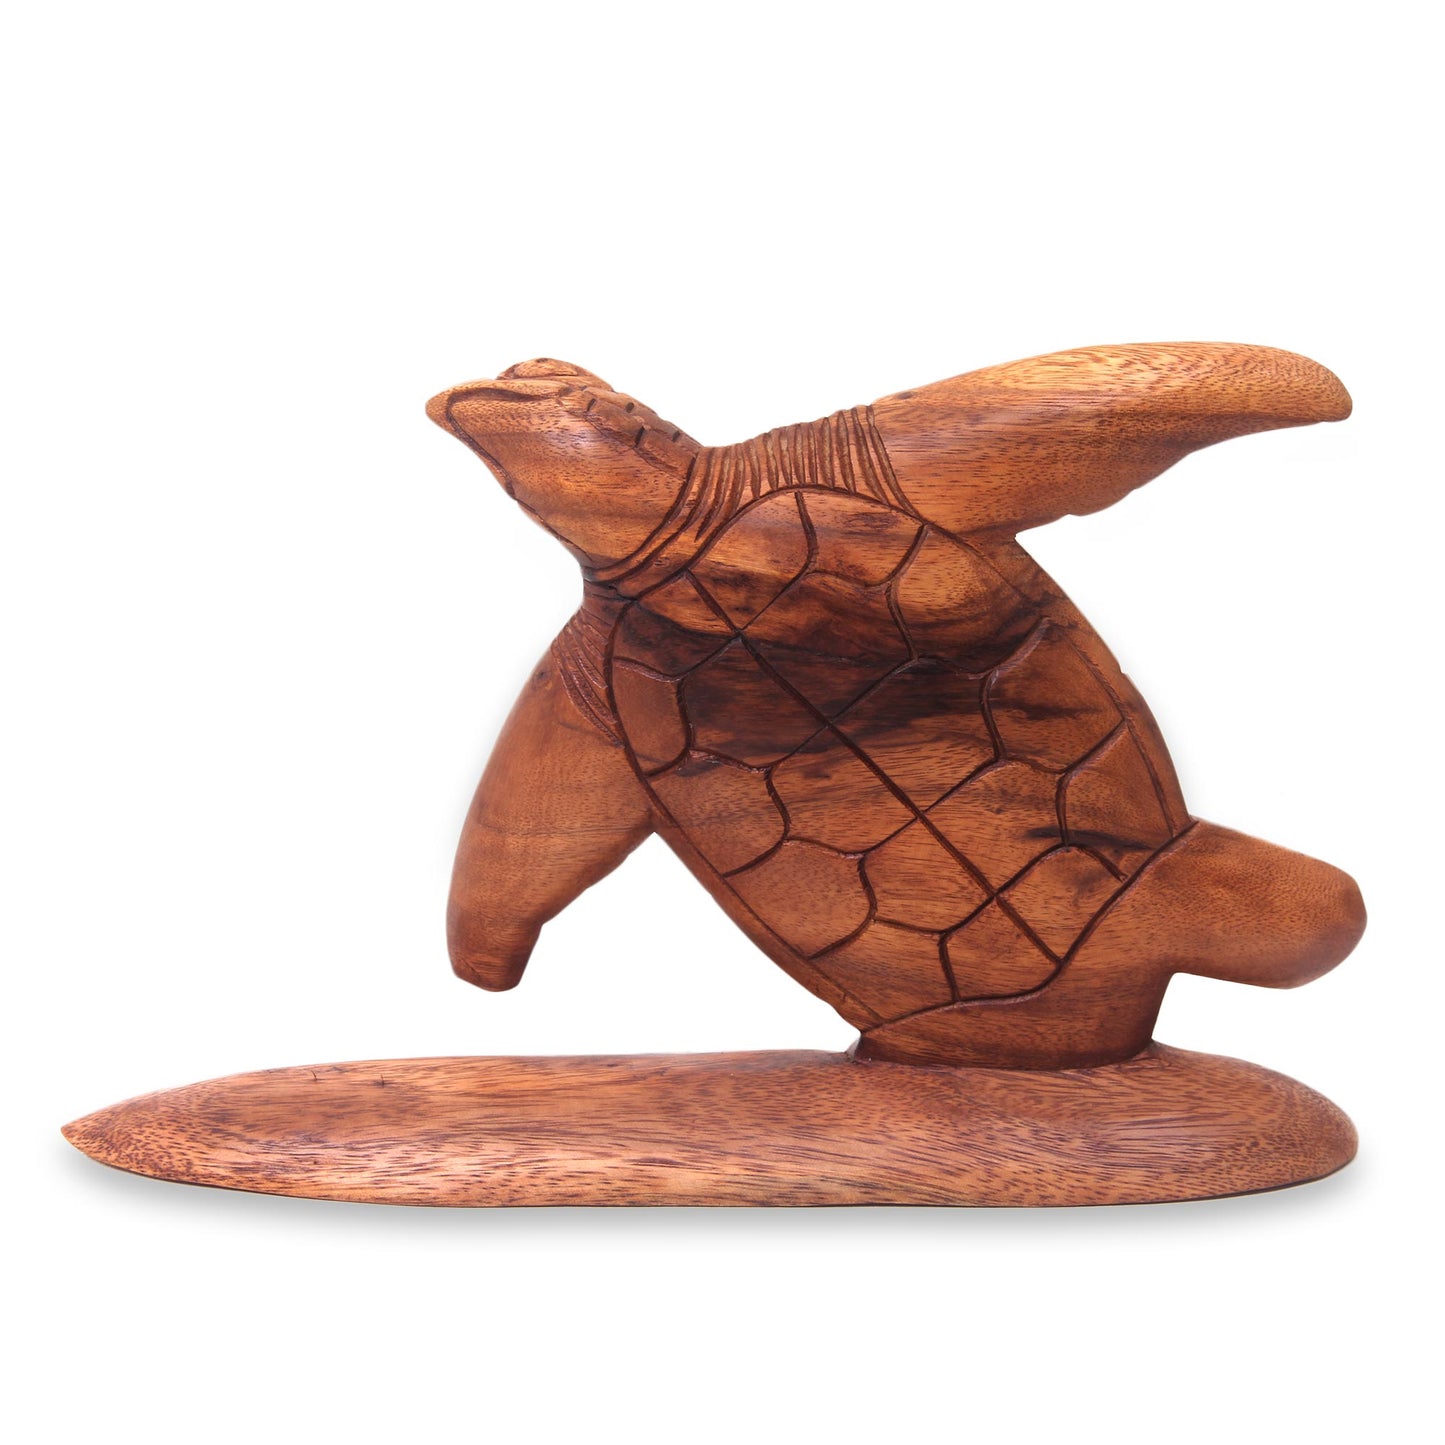 Surfer Turtle Hand Carved Wood Sculpture Turtle on Surf Board from Bali